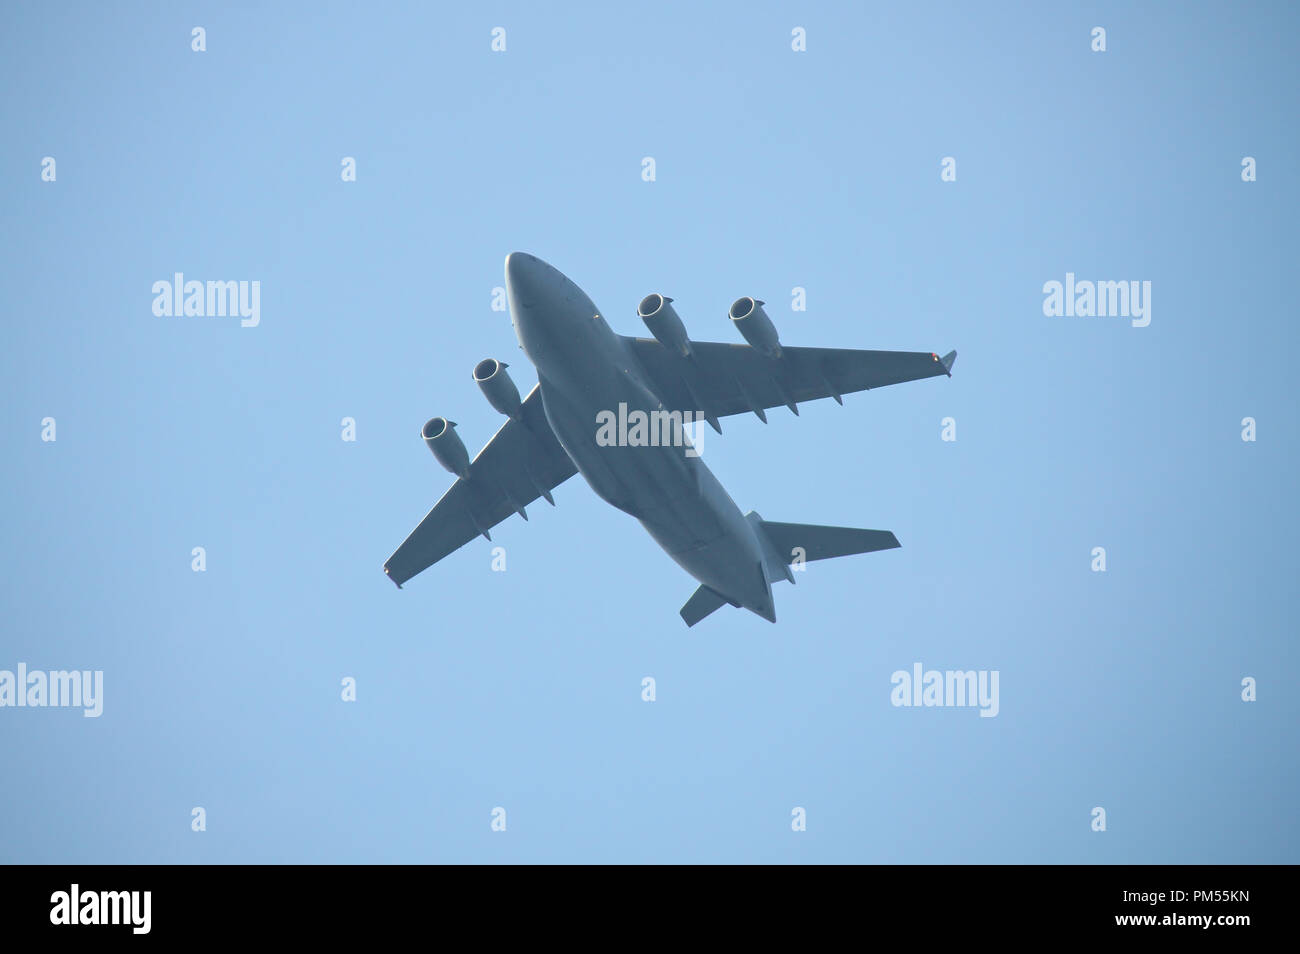 Four engine military cargo plane flying in the air. Dark gray plane silhouette with four jet engines, blue sky on the background. Stock Photo